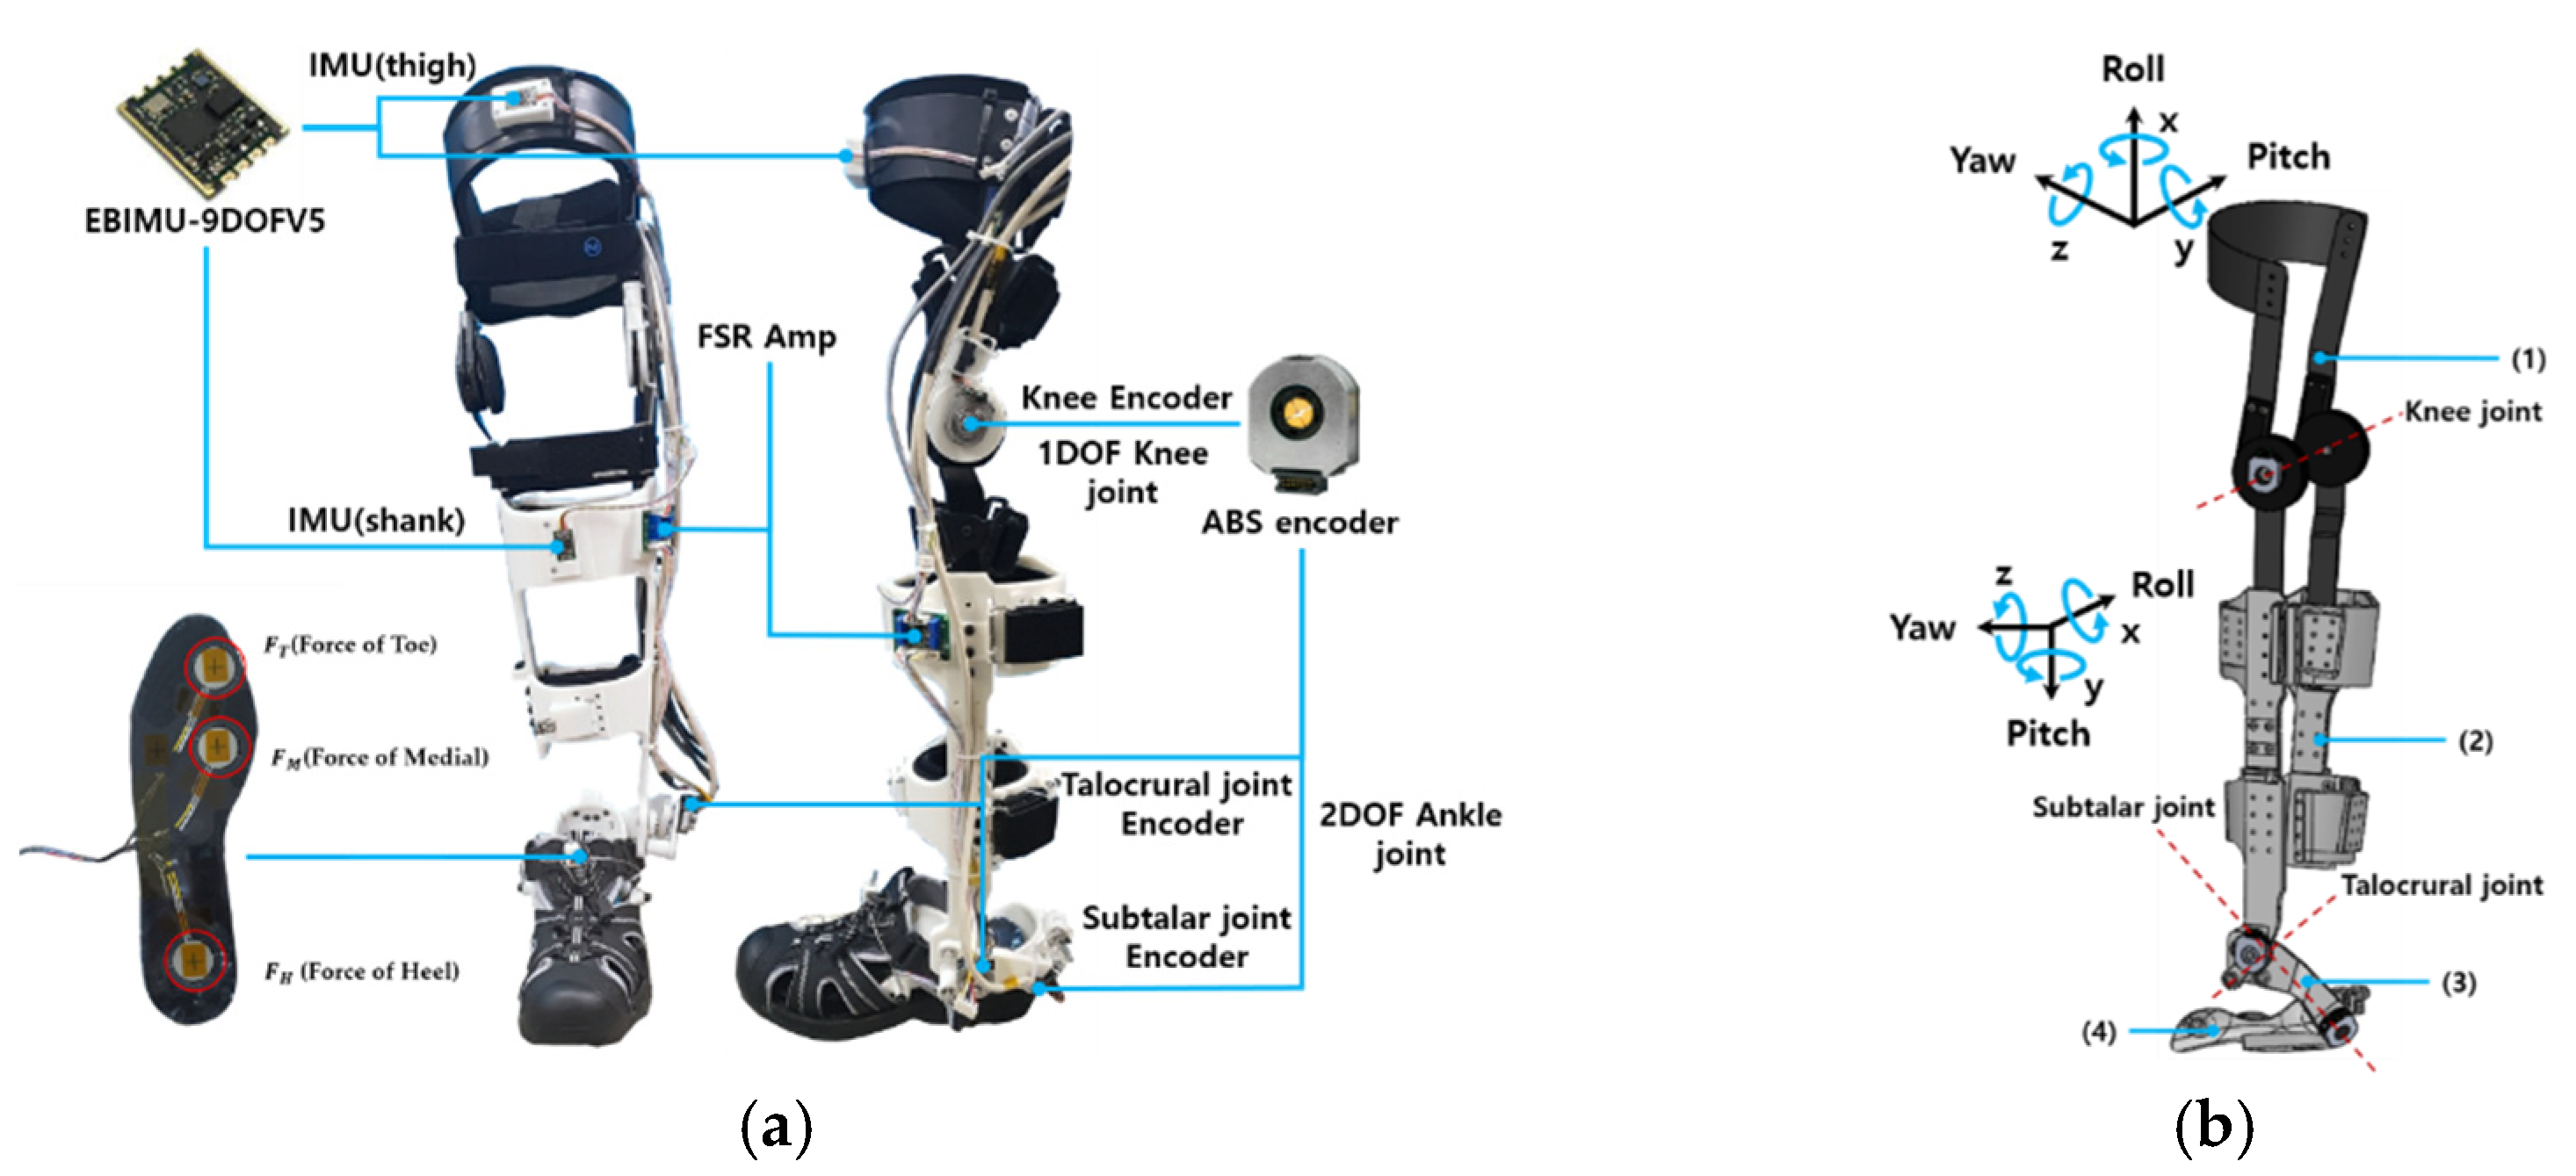 Sensors | Free Full-Text | Estimation of the Continuous Walking Angle of  Knee and Ankle (Talocrural Joint, Subtalar Joint) of a Lower-Limb  Exoskeleton Robot Using a Neural Network